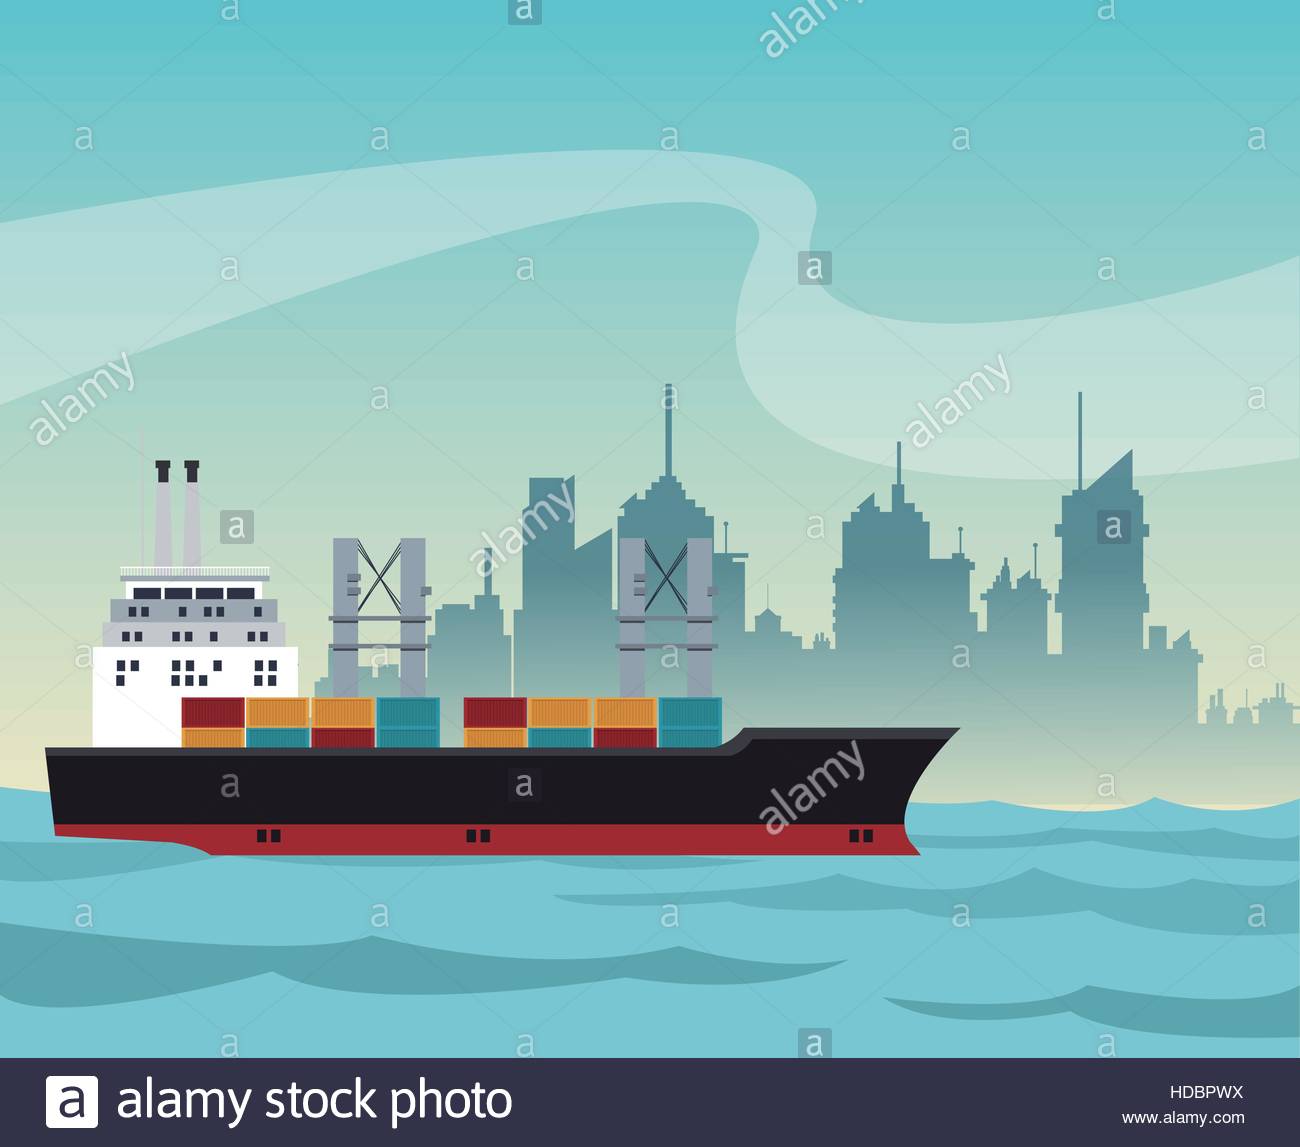 Ship Cargo Container Maritime Transport Urban Background Stock